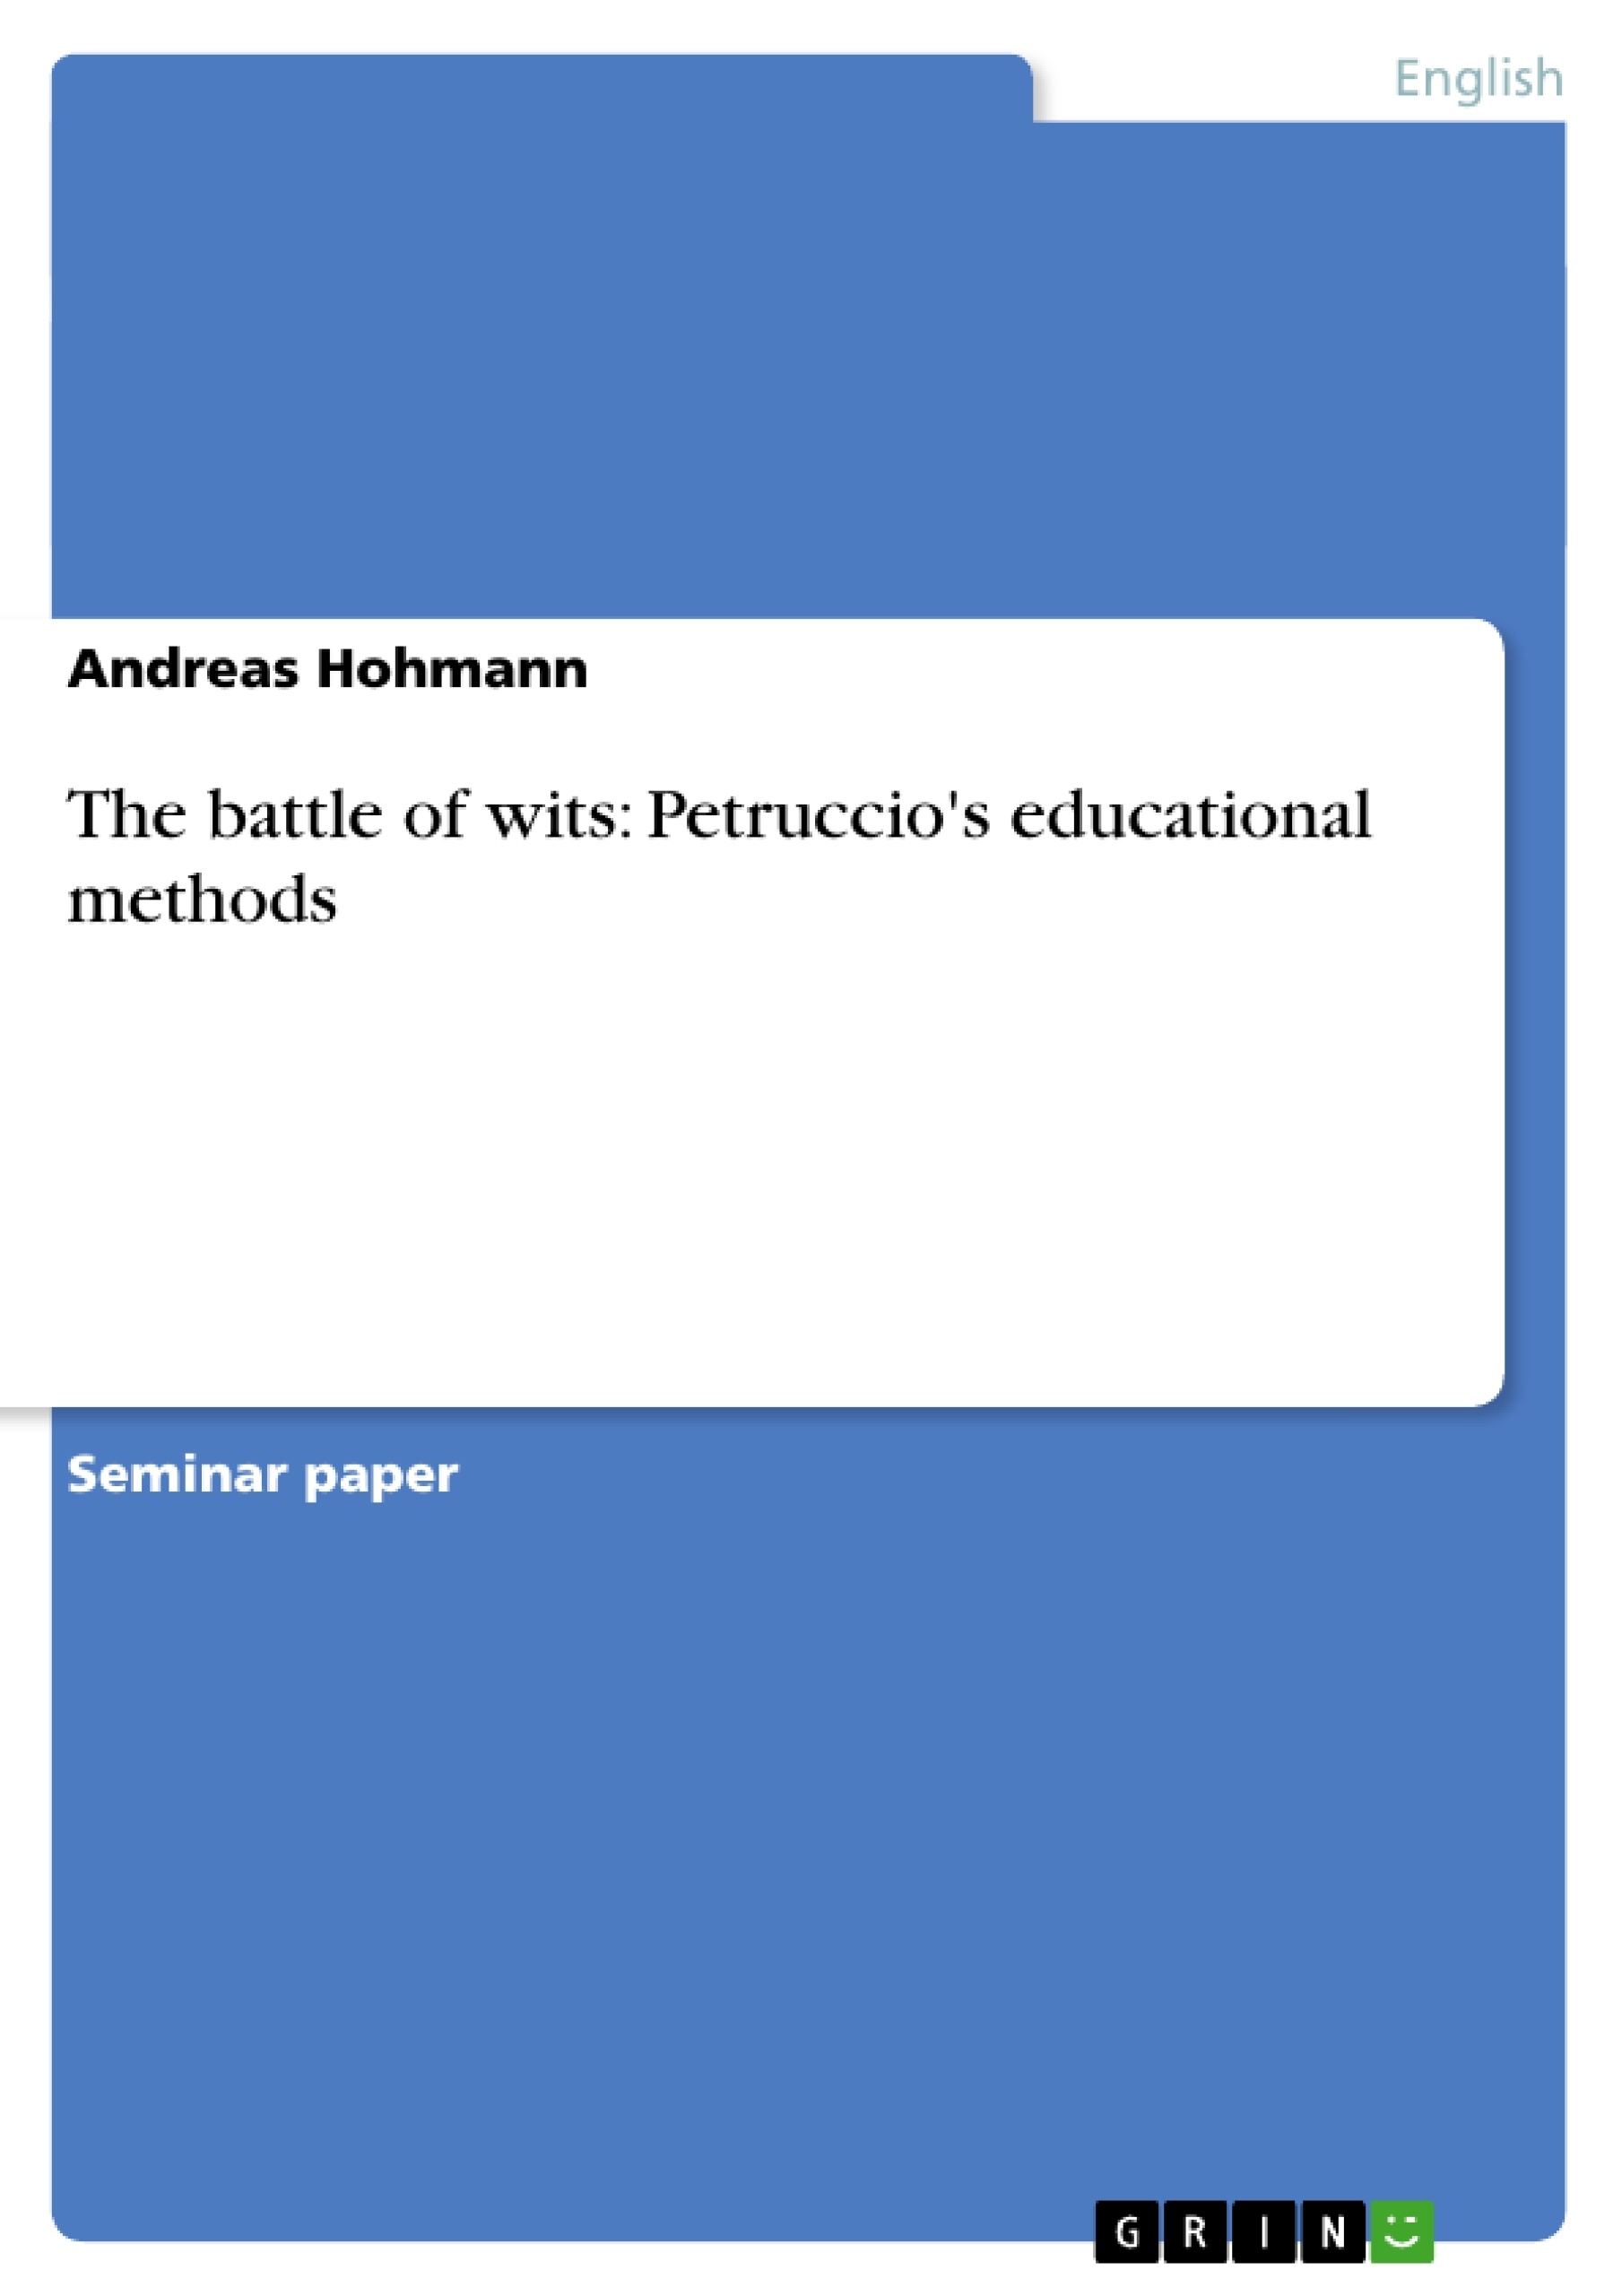 Title: The battle of wits: Petruccio's educational methods